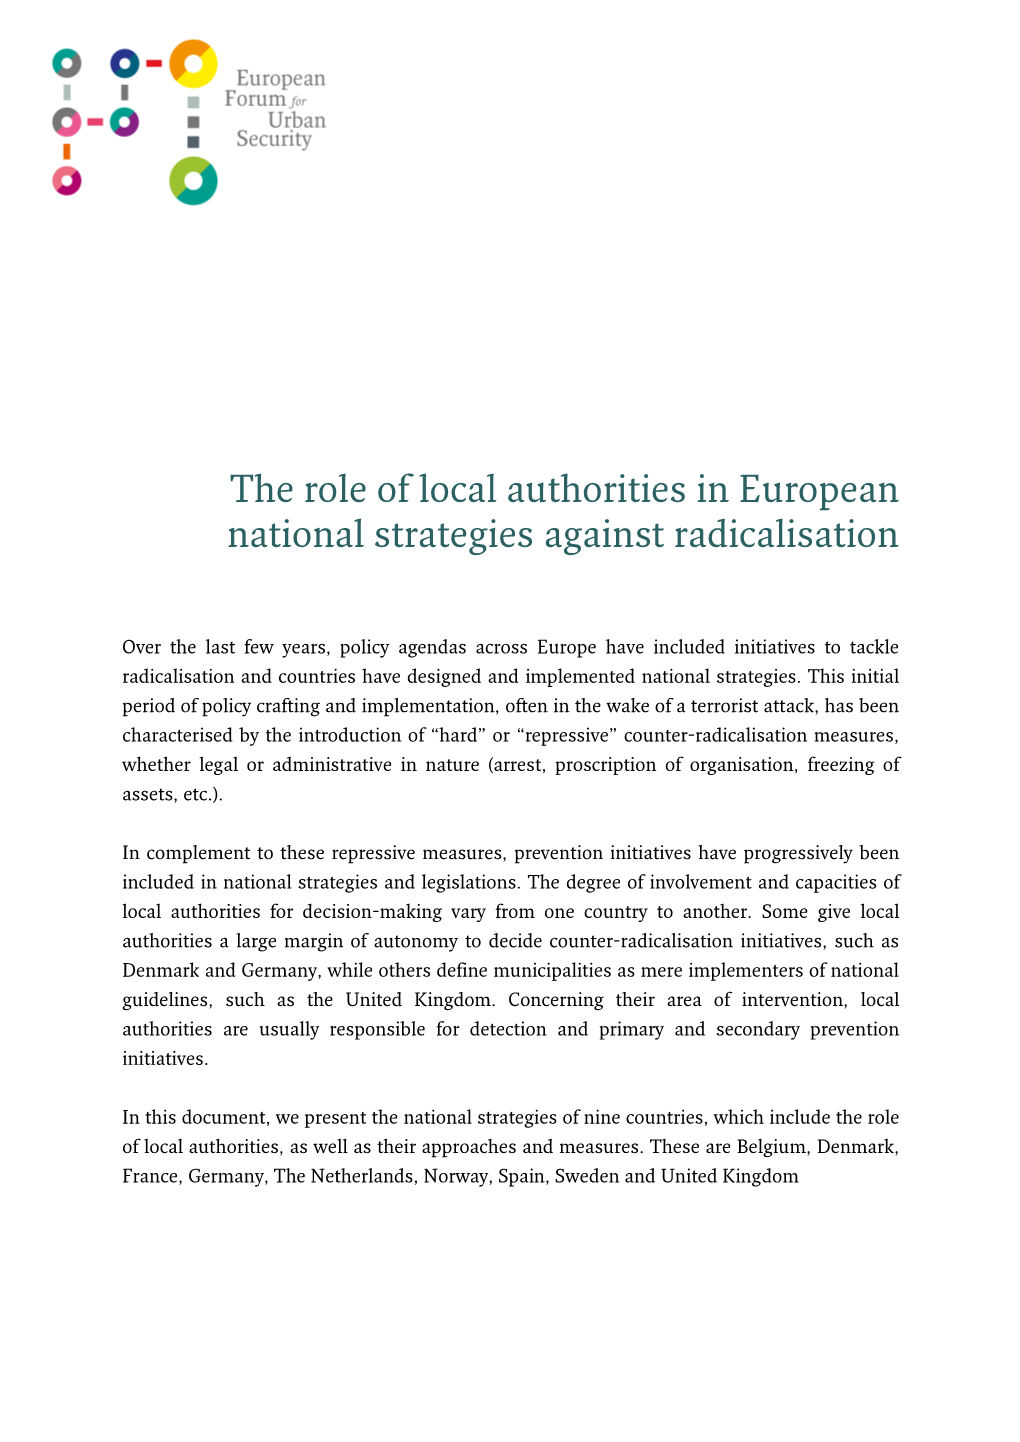 The Role of Local Authorities in National Strategies